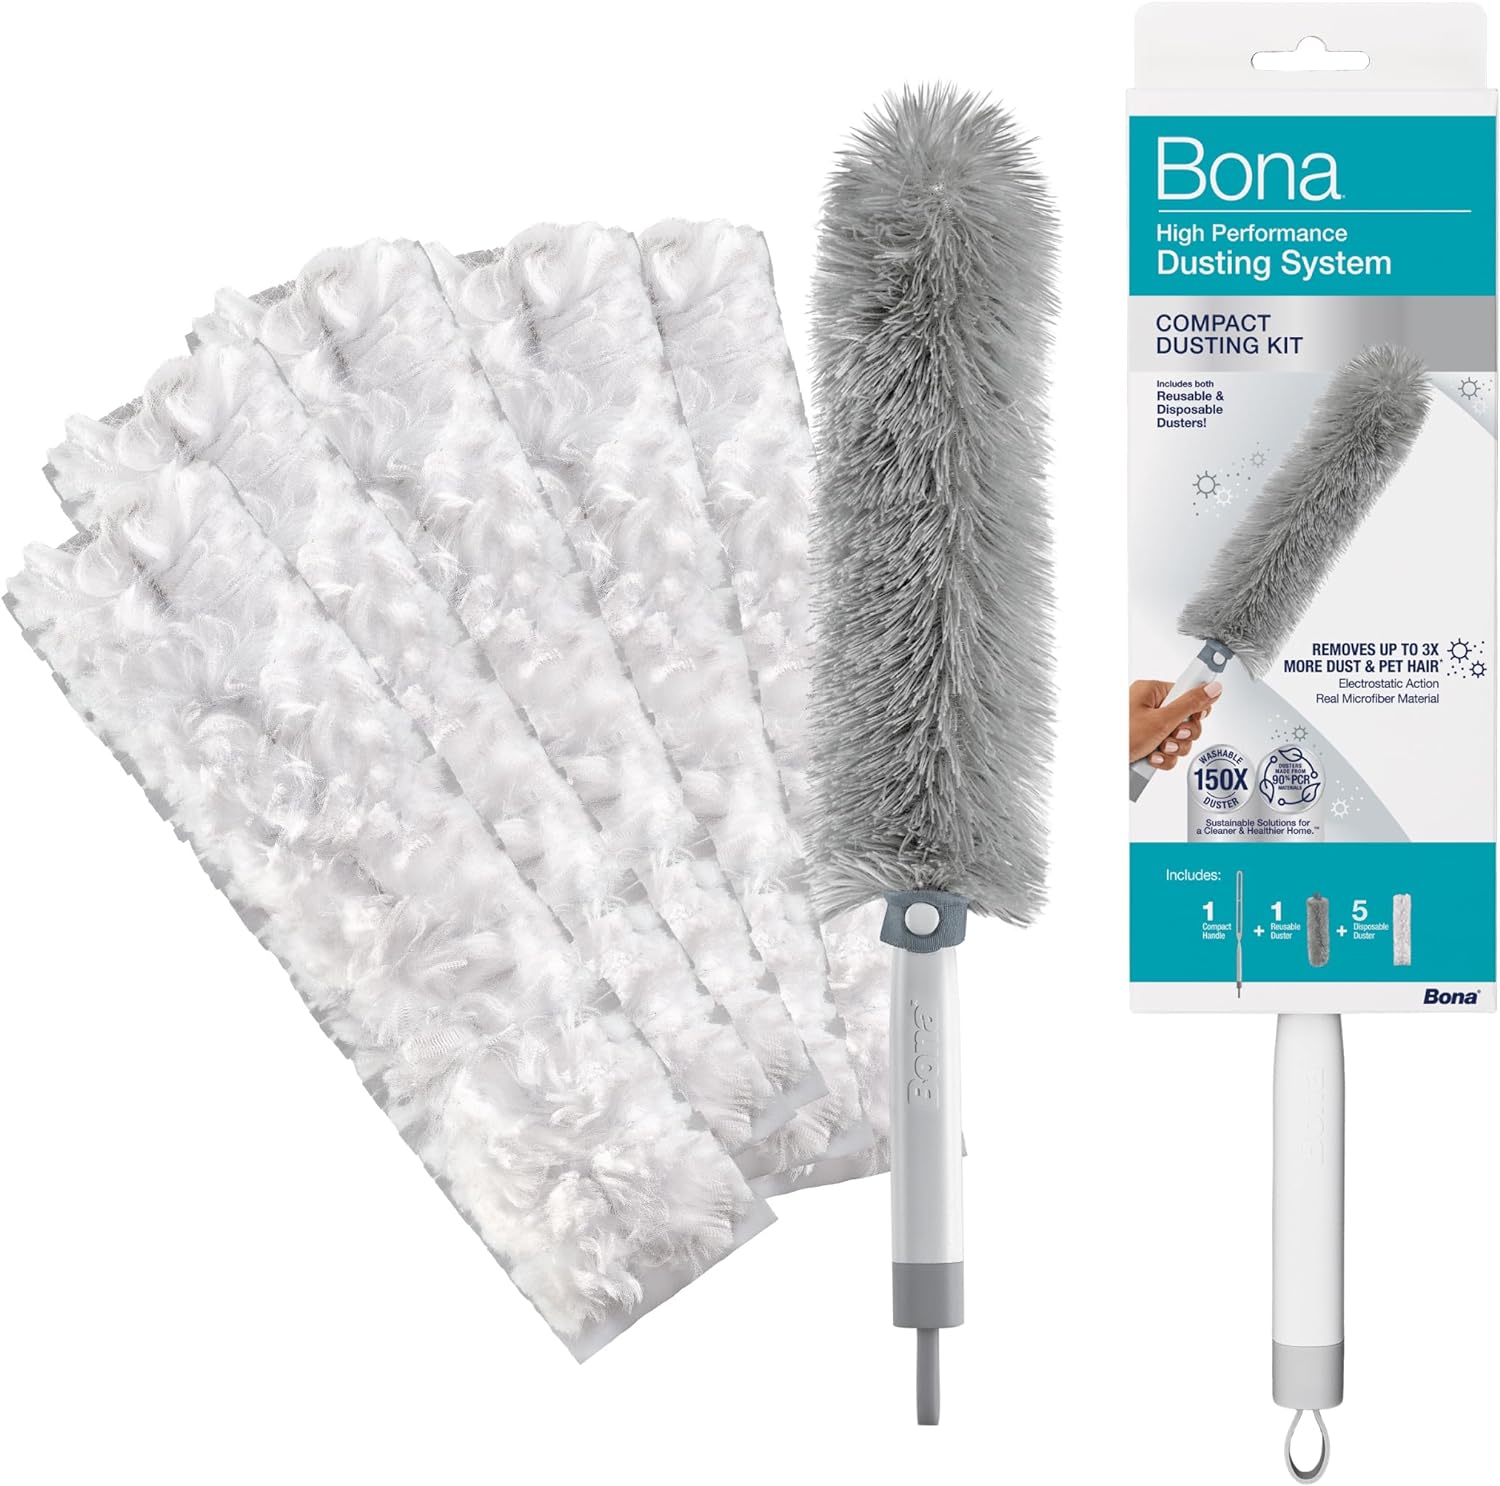 Bona High Performance Dusting System Compact Dusting Kit